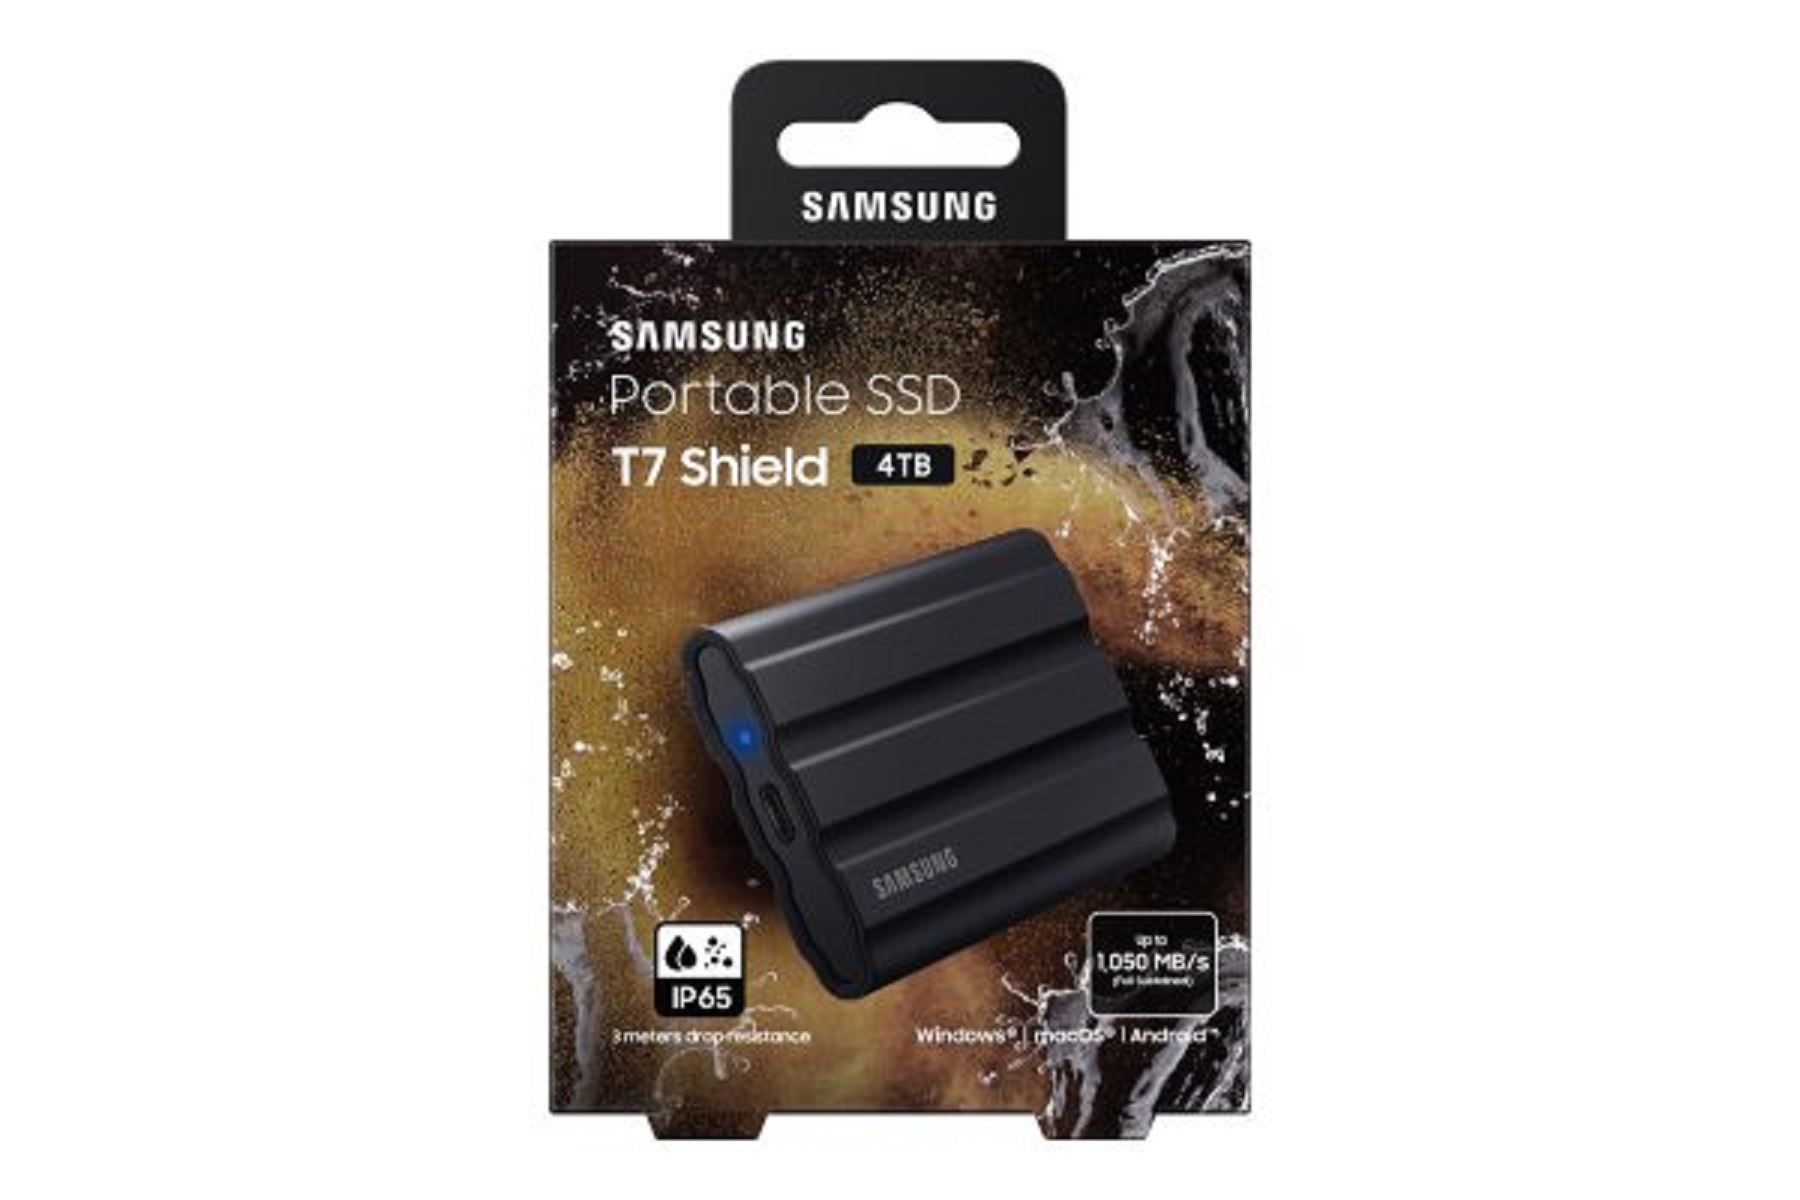 Samsung Introduces 4TB Capacity of Rugged T7 Shield Portable SSD